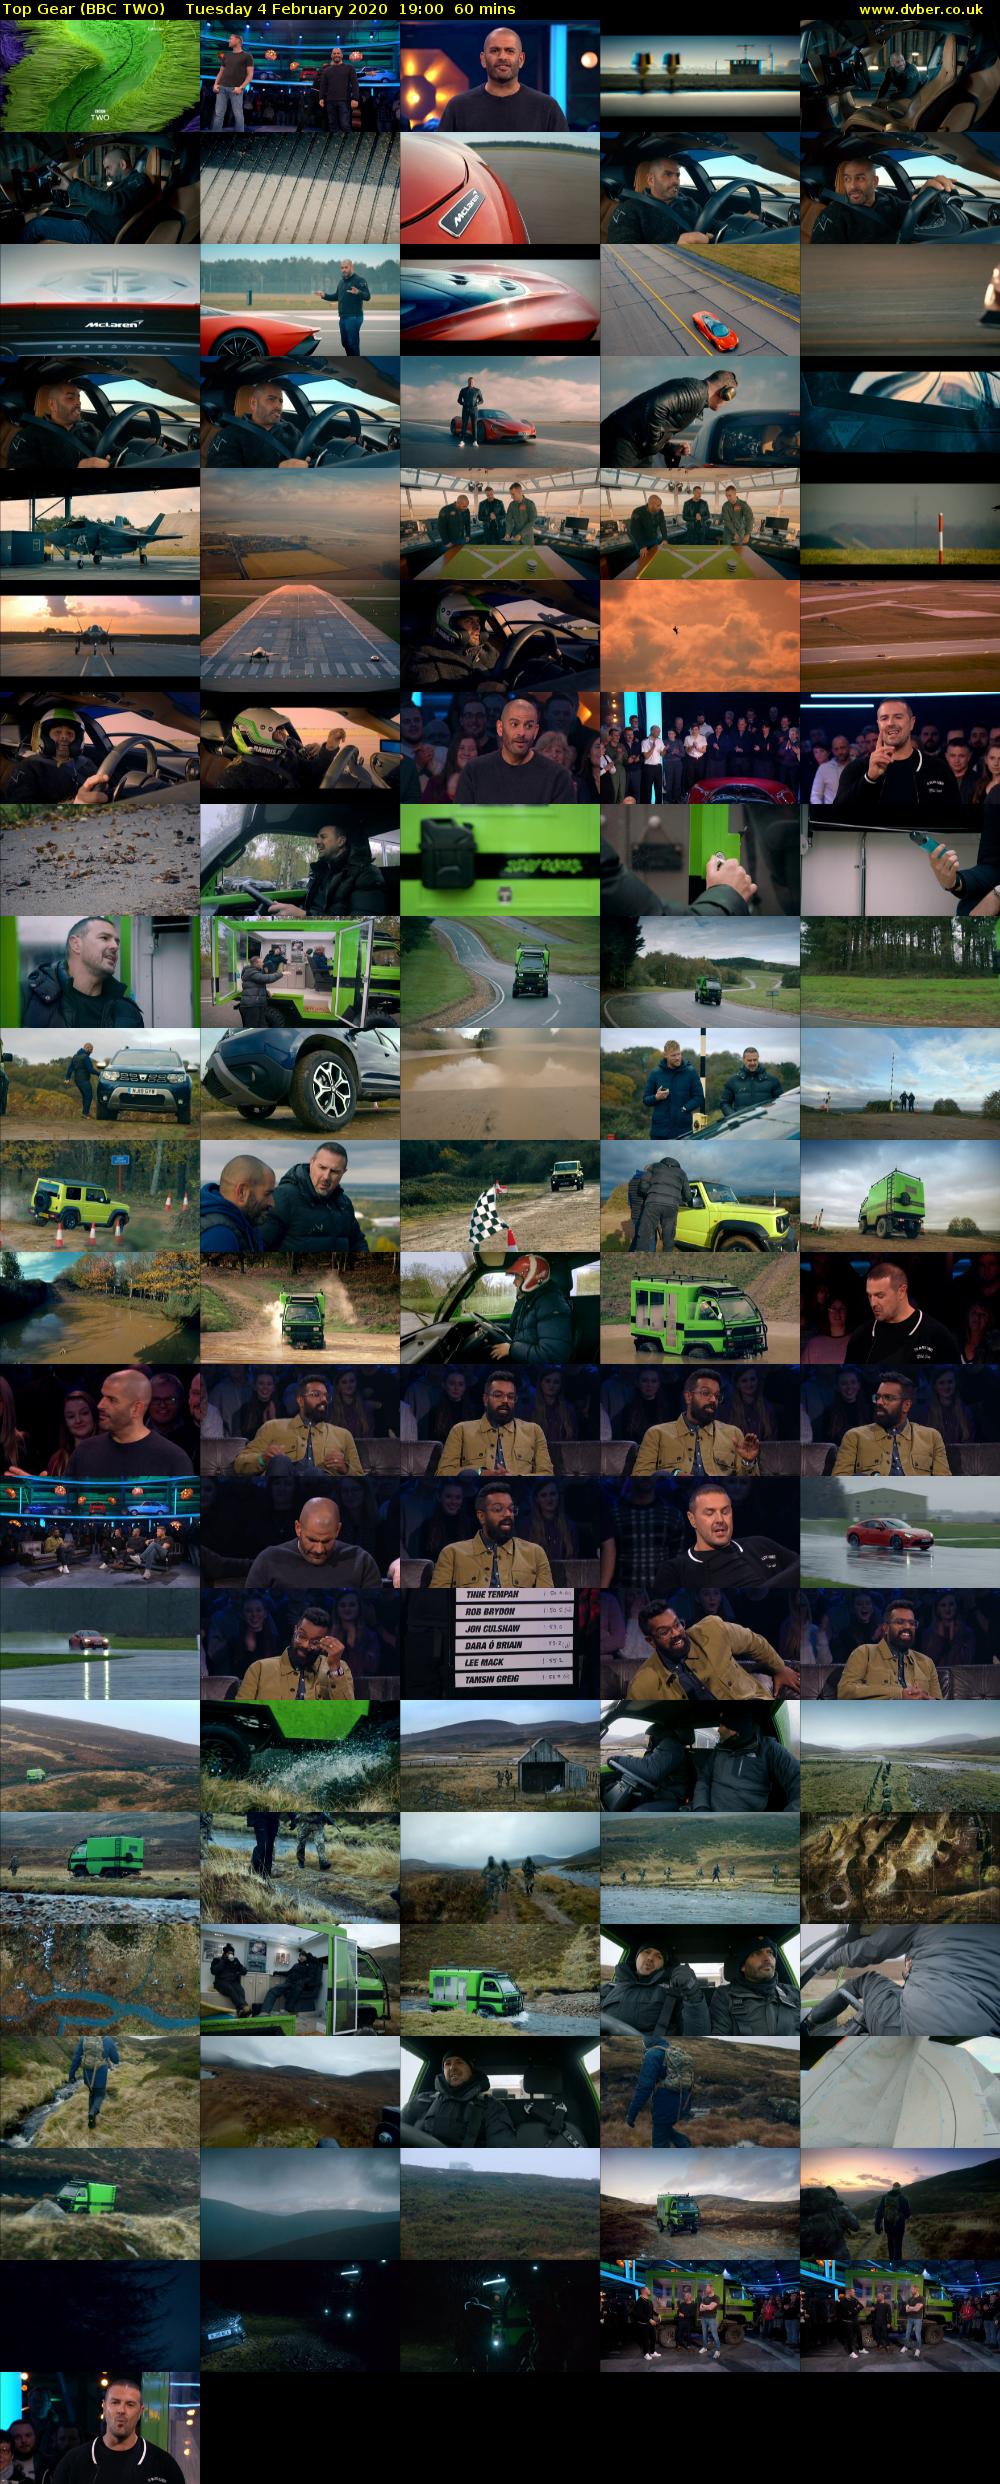 Top Gear (BBC TWO) Tuesday 4 February 2020 19:00 - 20:00